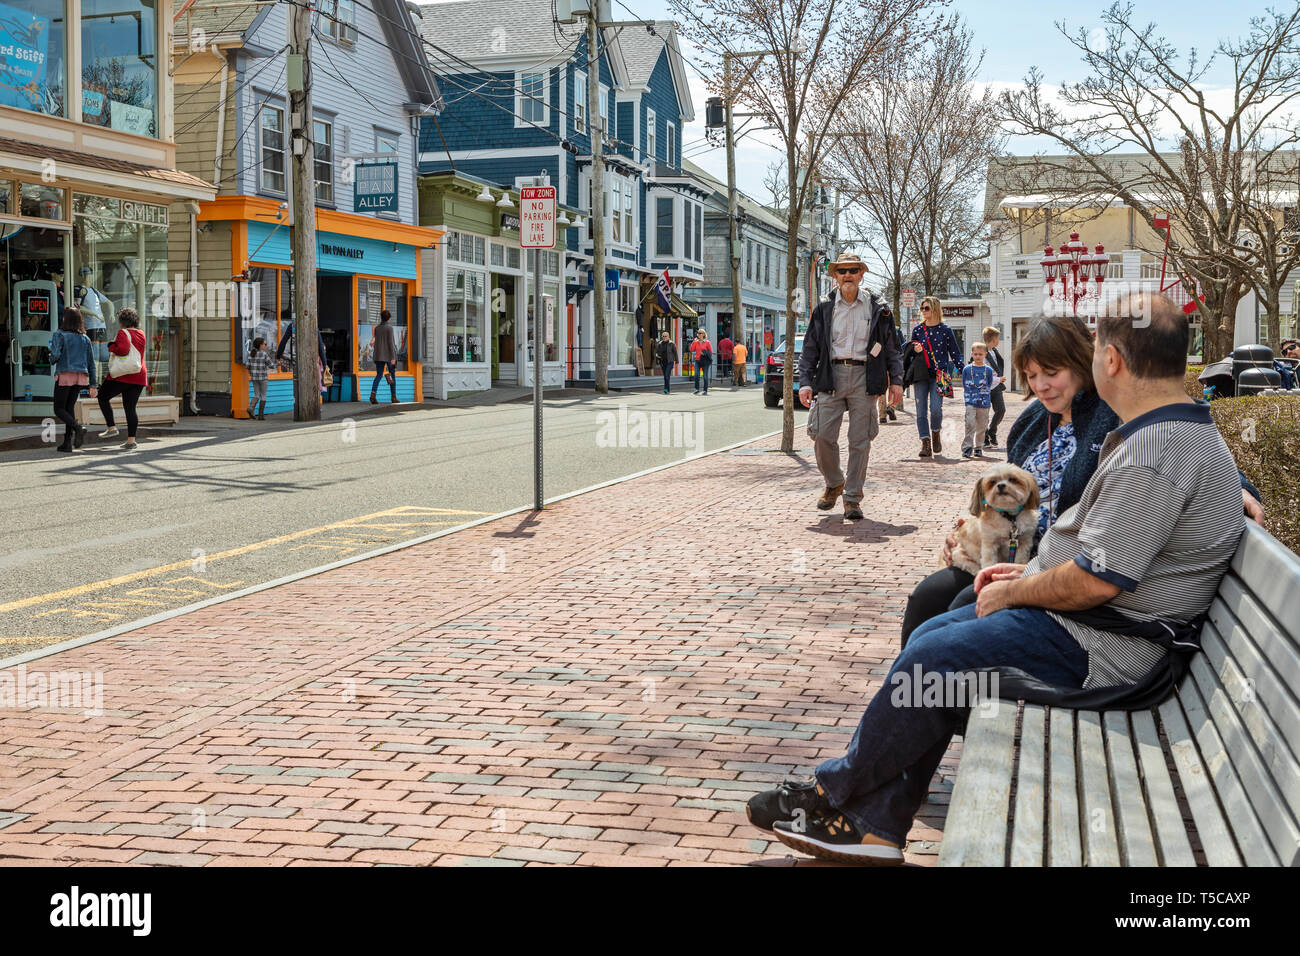 People sitting on a bench, watching people on a beautiful day. Stock Photo